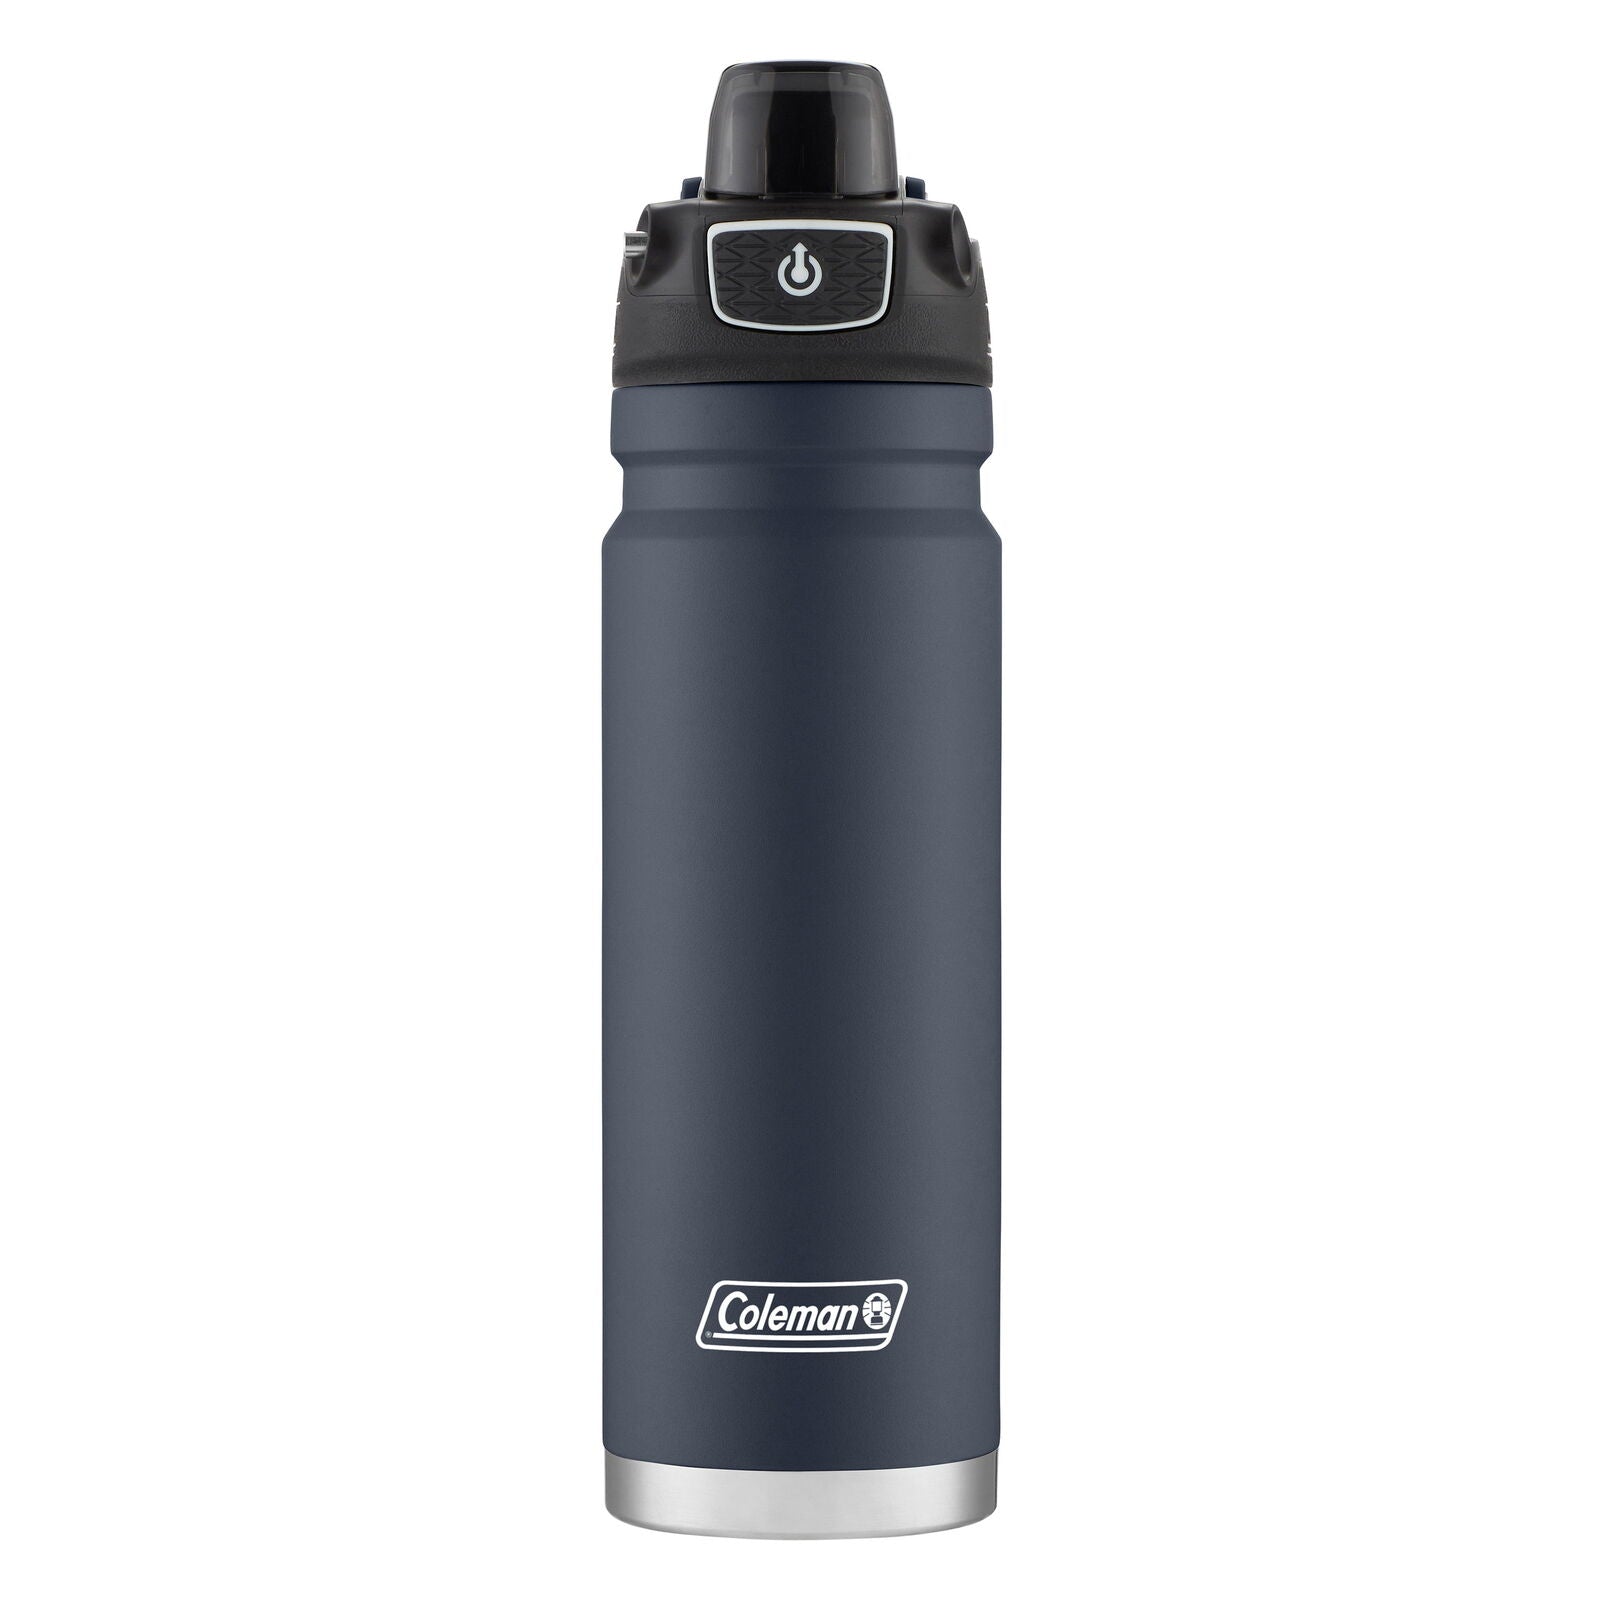 Coleman 24 oz. Burst Vacuum Insulated Stainless Steel Water Bottle Coleman